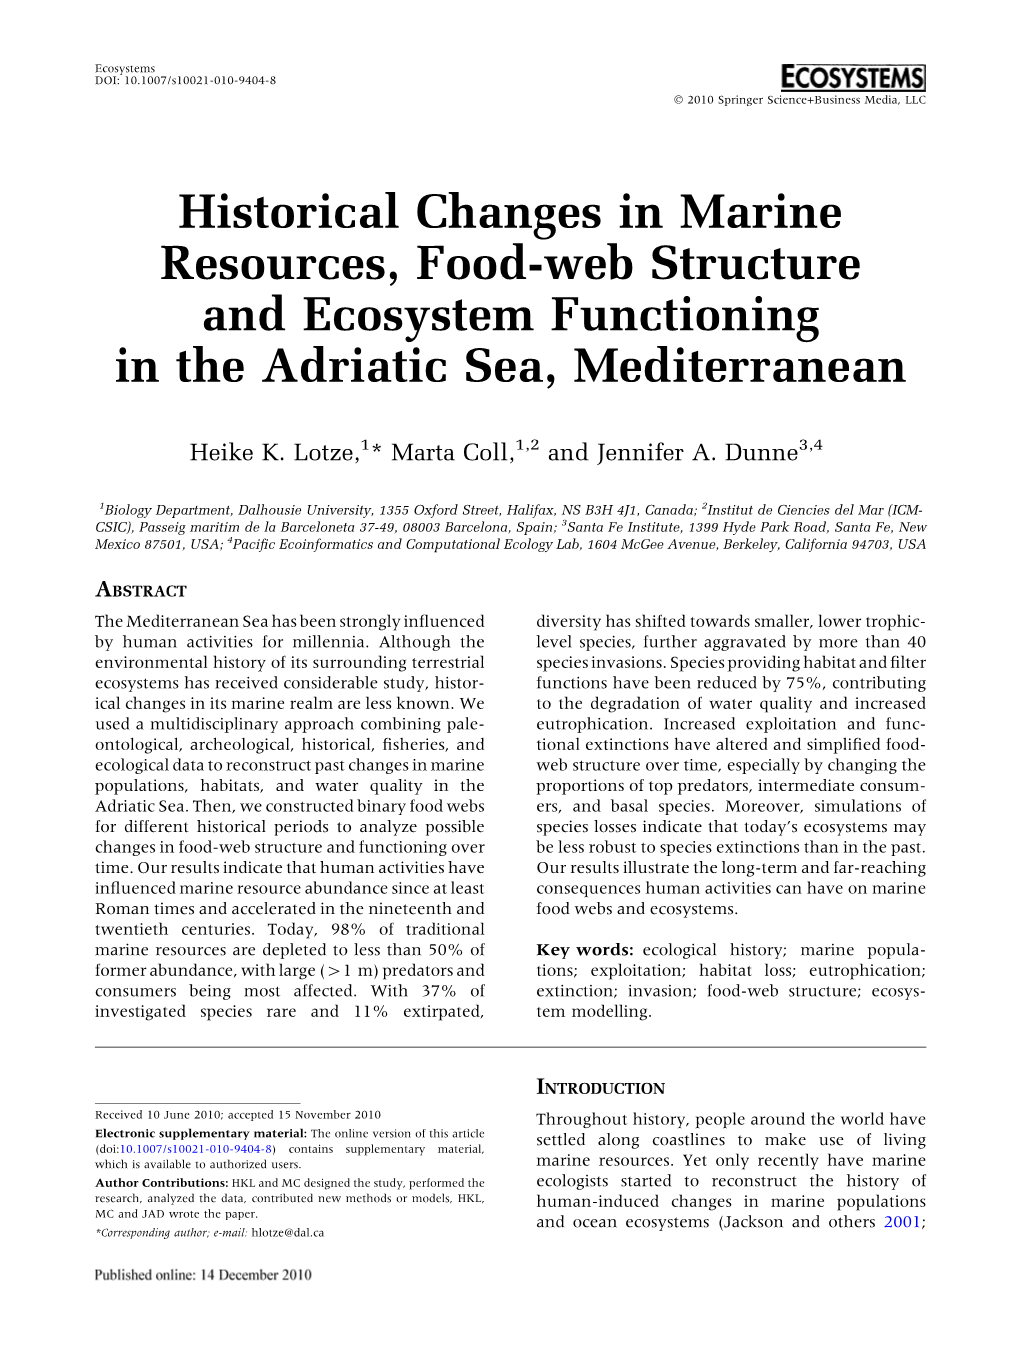 Historical Changes in Marine Resources, Food-Web Structure and Ecosystem Functioning in the Adriatic Sea, Mediterranean